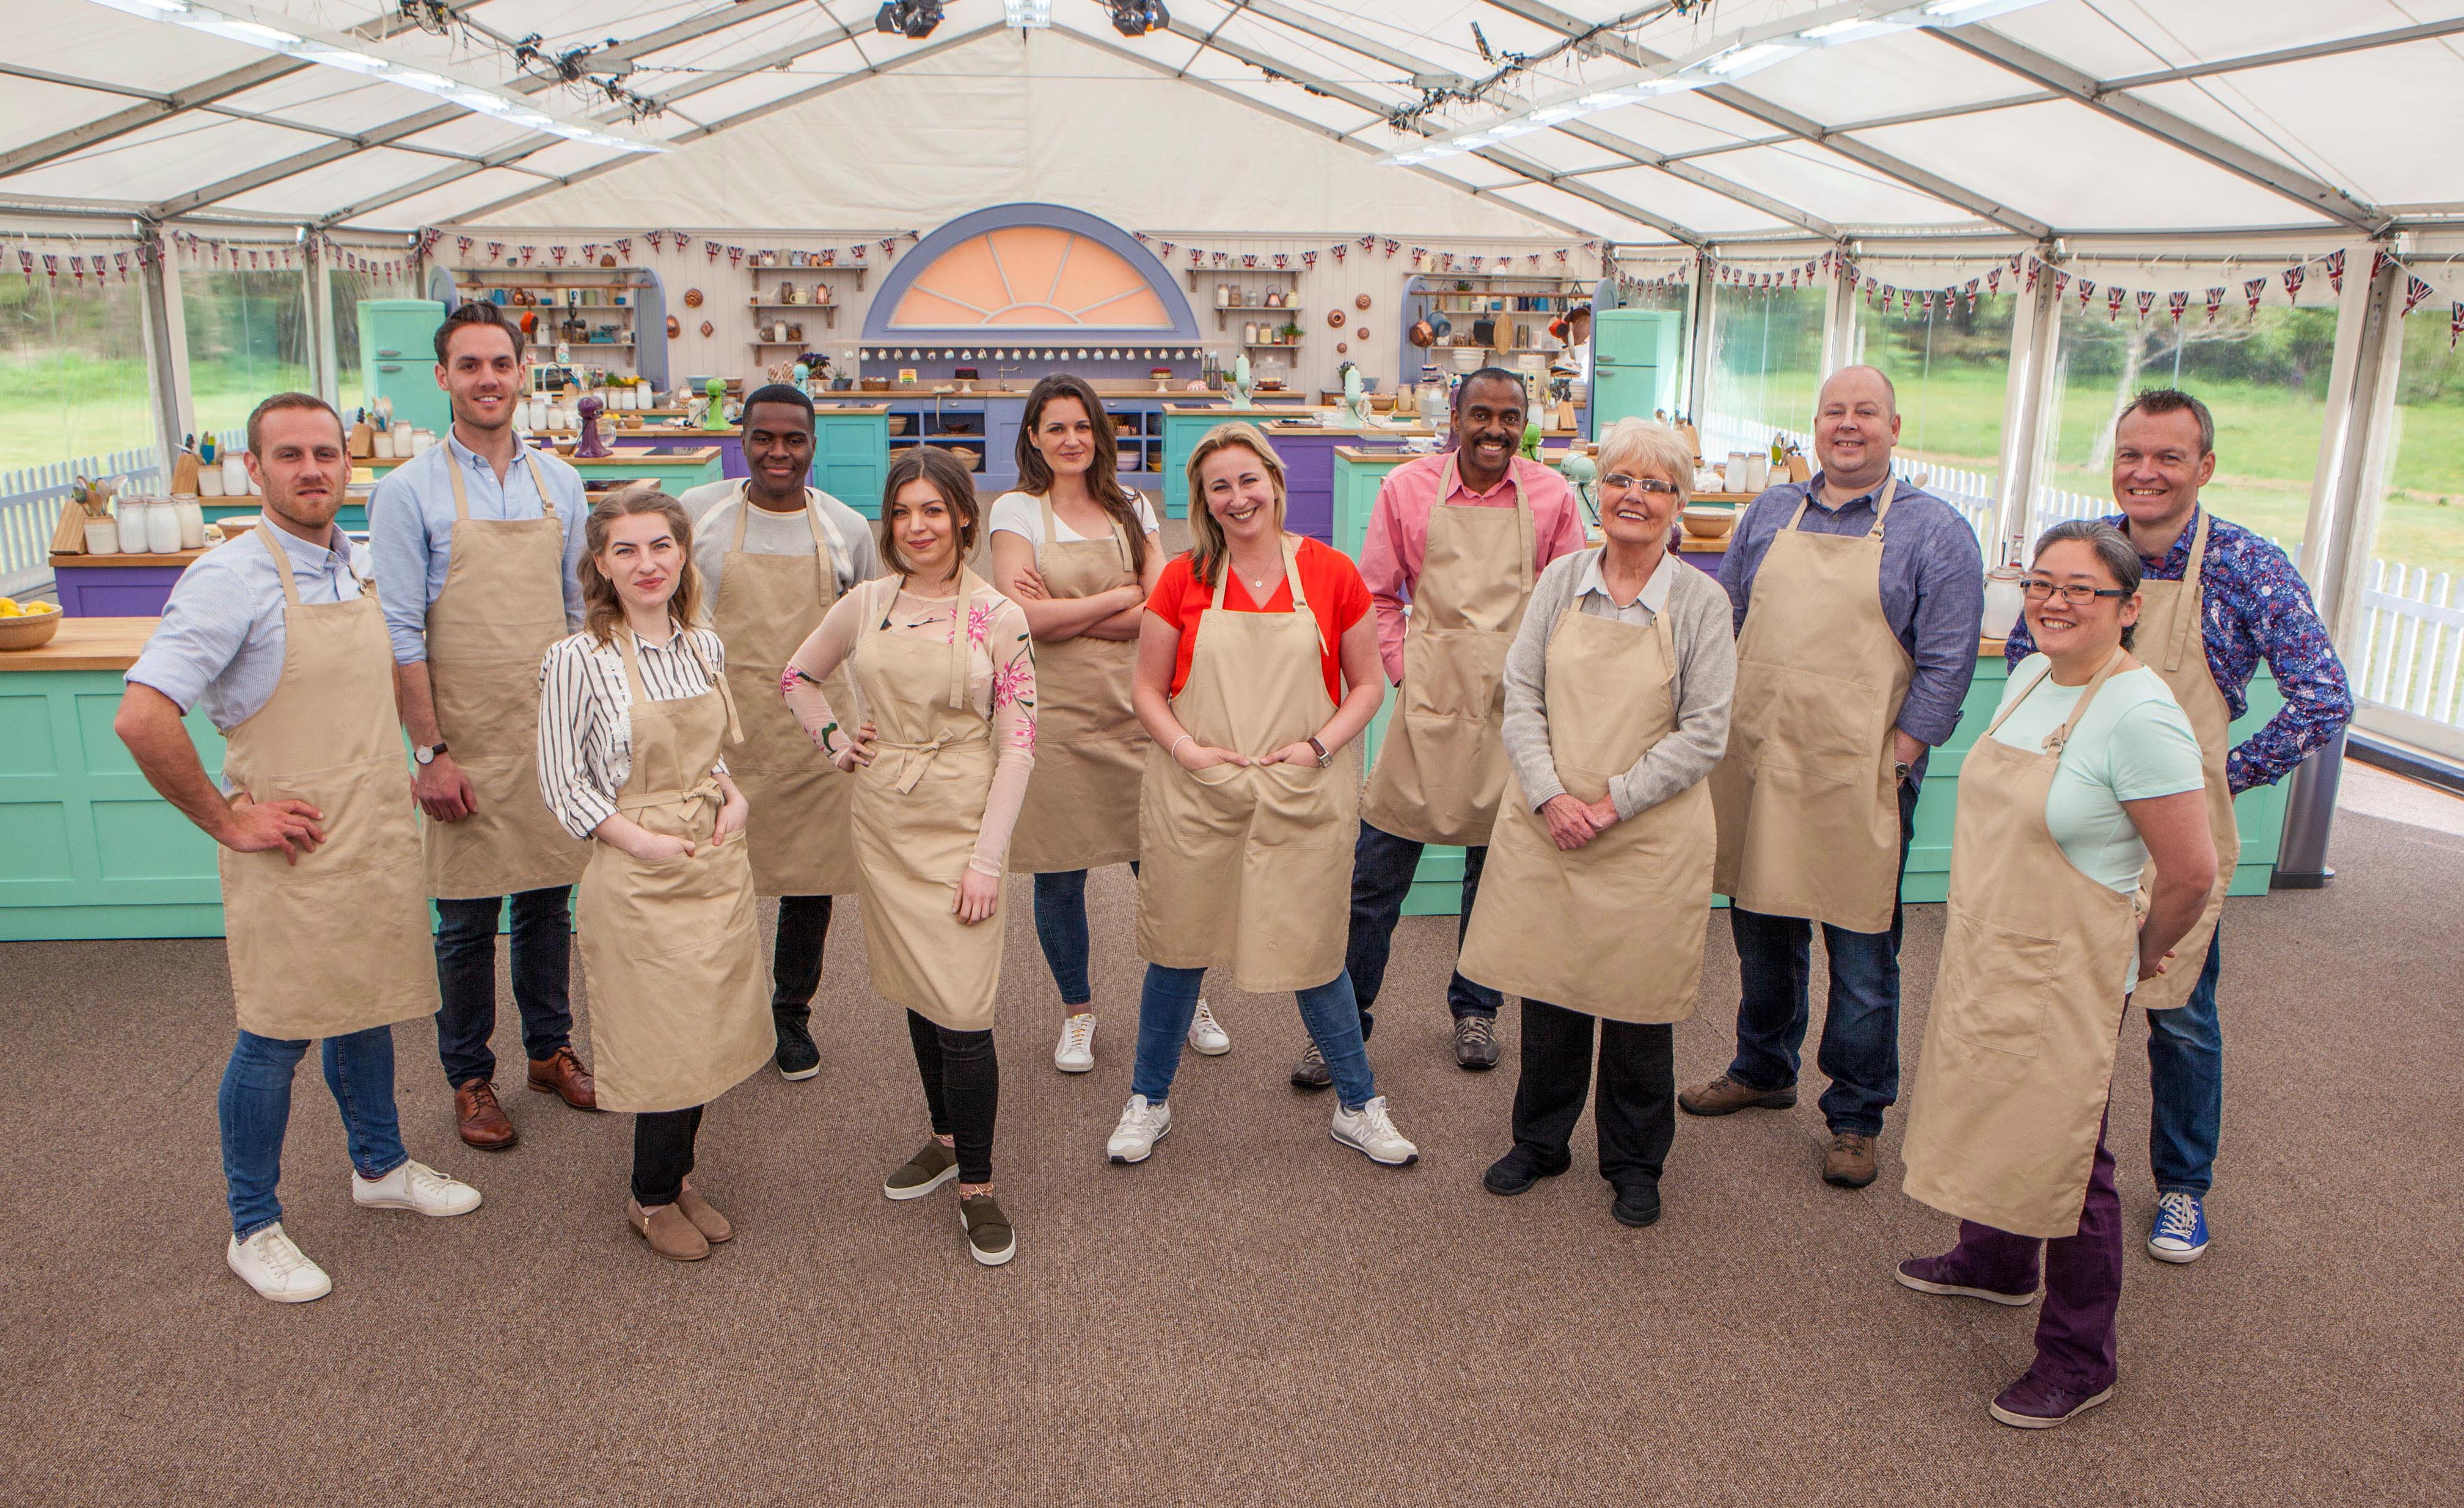 The Great British Bake Off, Back row L to R: Steven, Tom, Liam, Sophie, Peter, James, Chris. Front Row L to R: Julia, Kate, Stacey, Flo, Yan (Mark Bourdillon/Love Productions/Channel4)